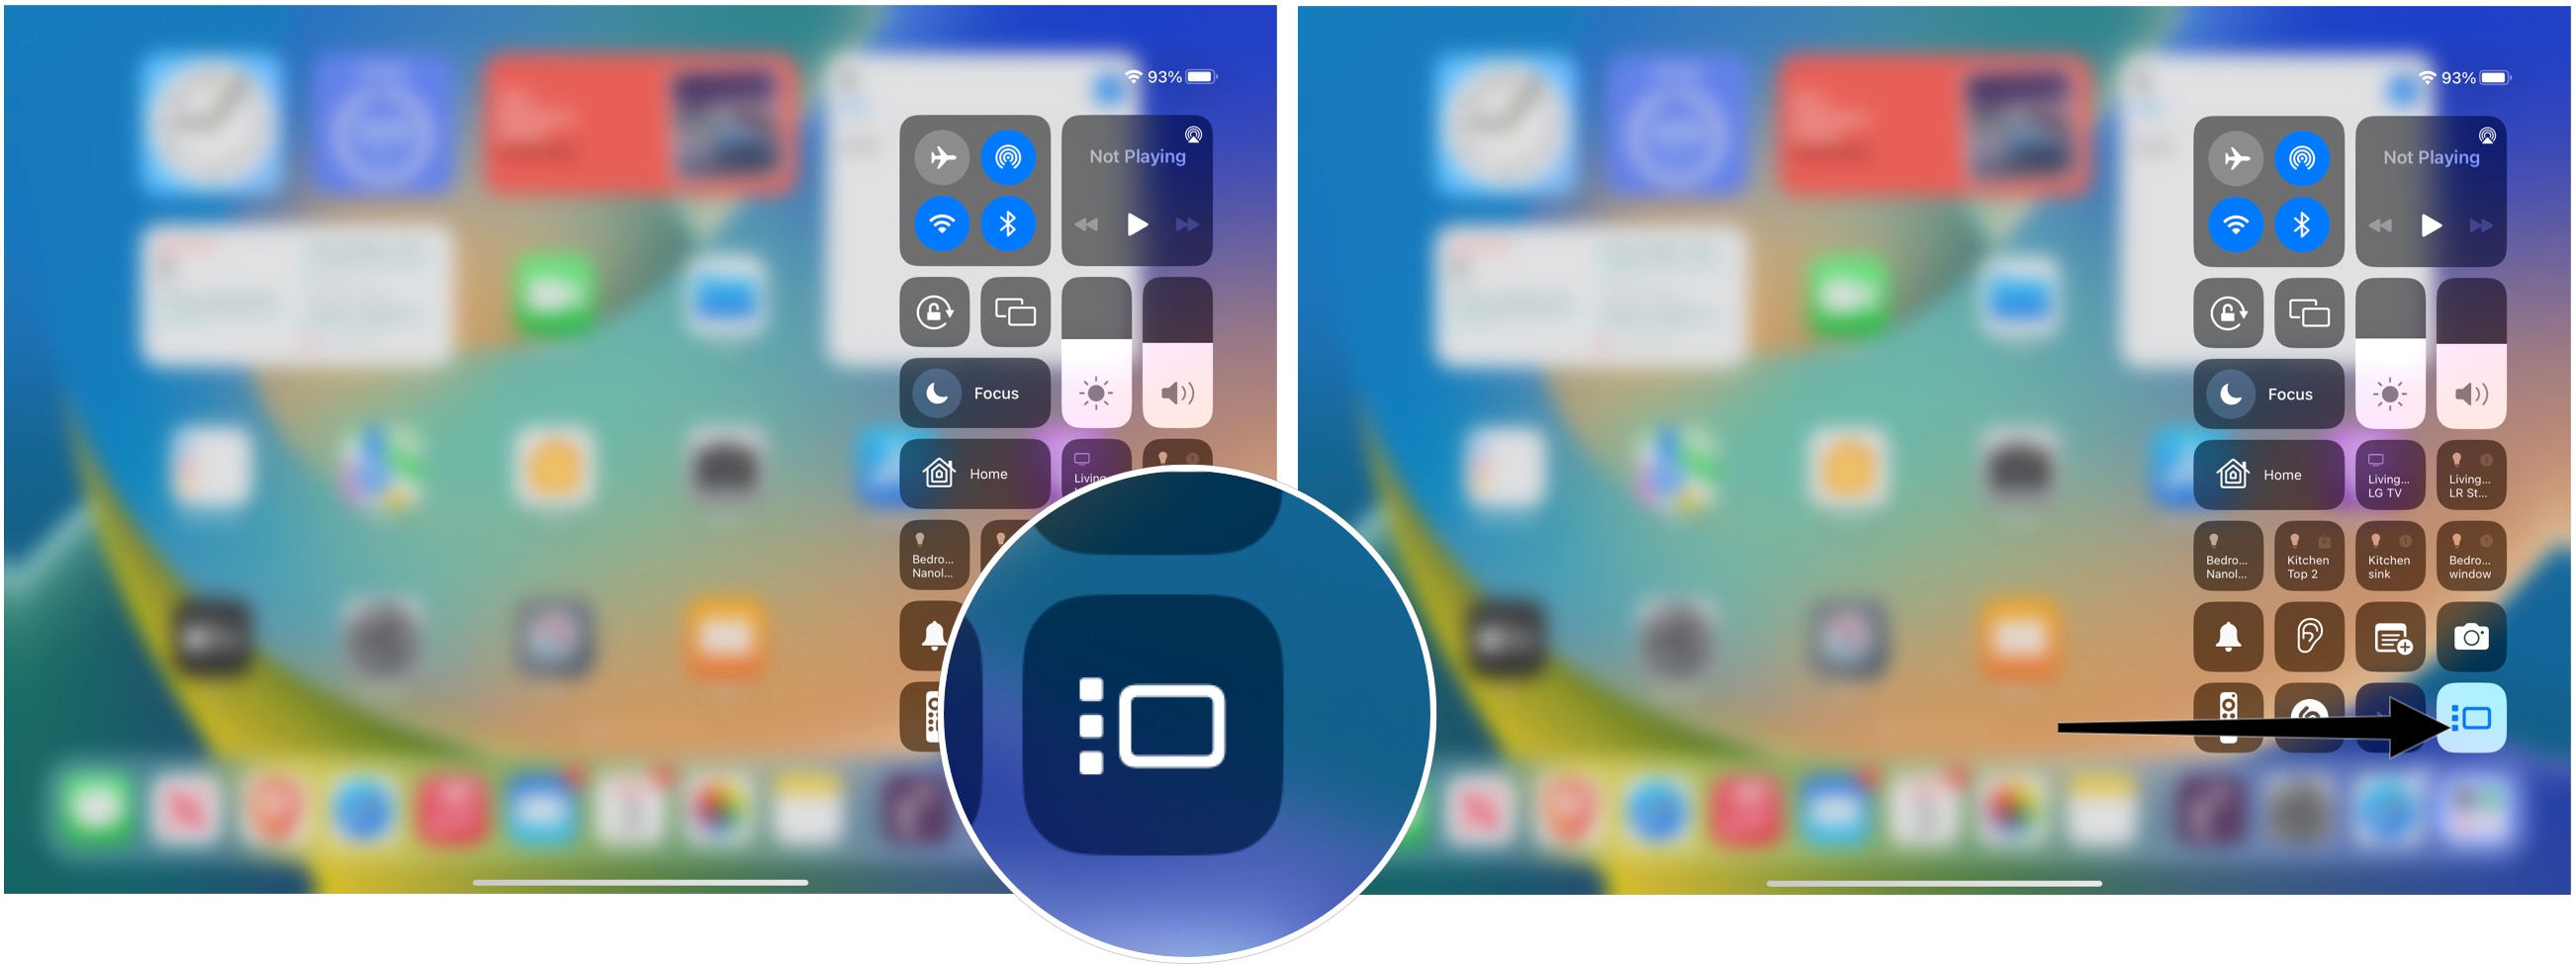 To turn on Stage Manager from Control Panel on iPadOS 16: Pull your finger down from the top right of the screen to bring up Control Center. Tap the Stage Manager icon to activate.